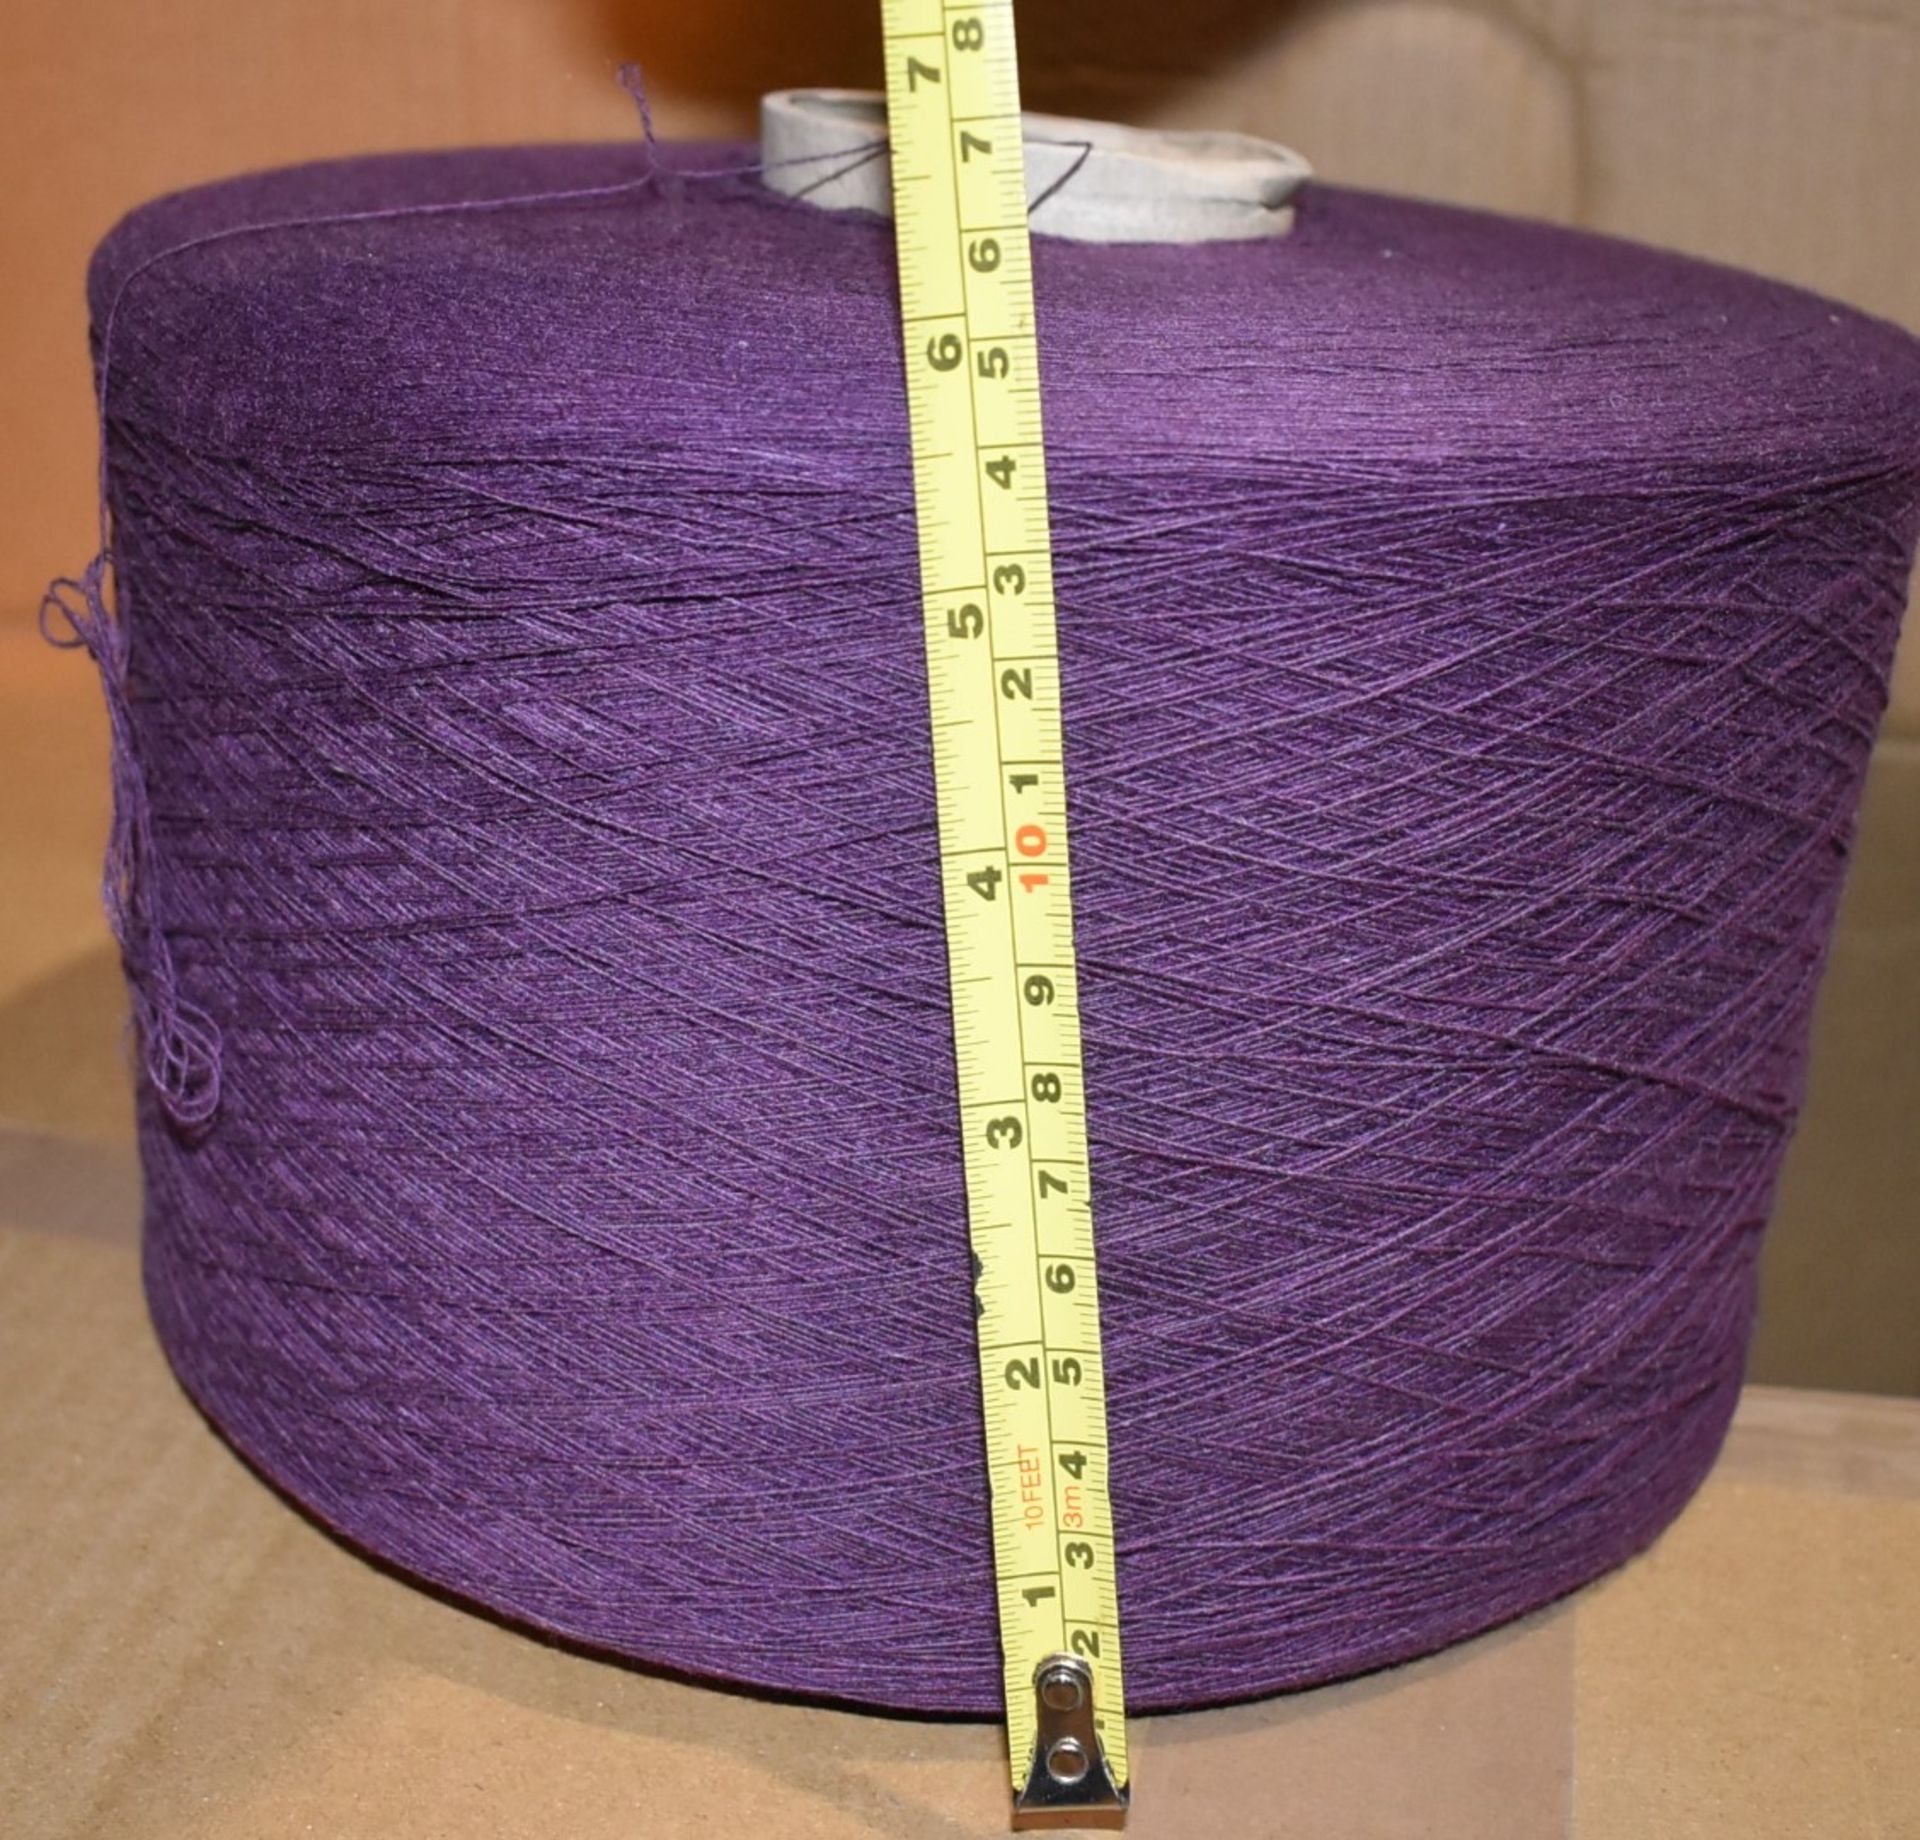 1 x Cone of 1/13 MicroCotton Knitting Yarn - Purple - Approx Weight: 2,300g - New Stock ABL Yarn - Image 8 of 10